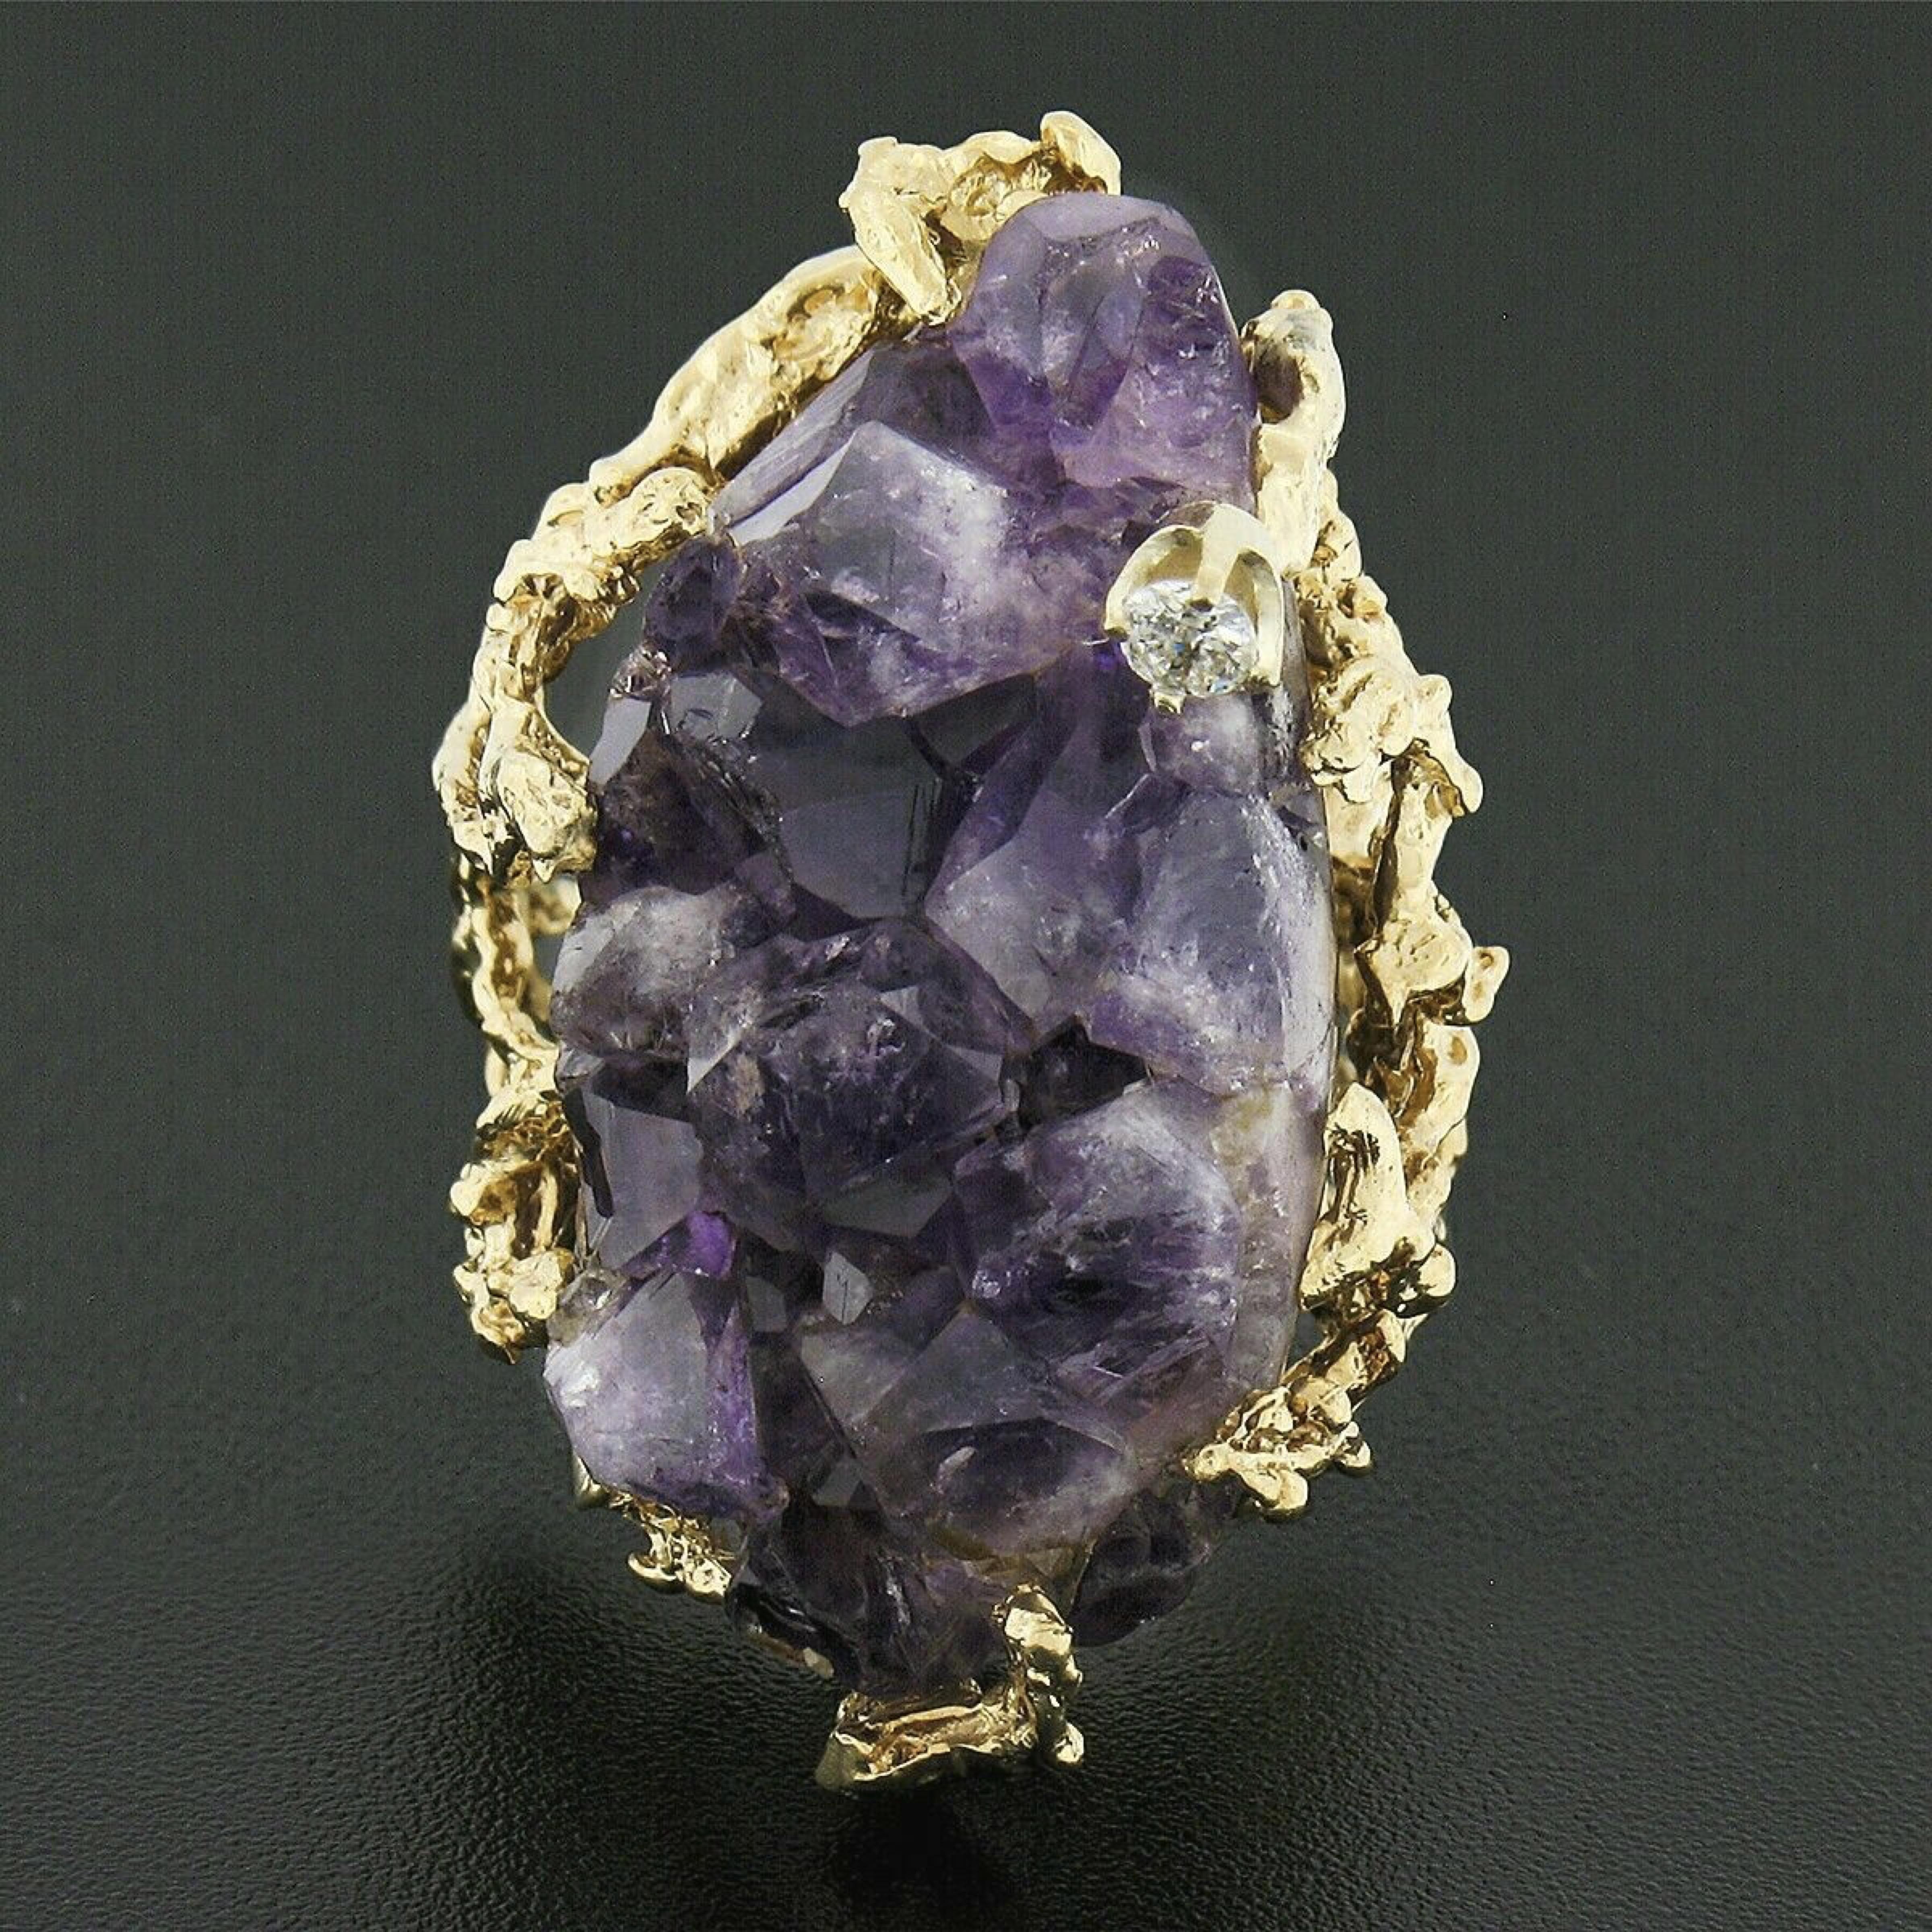 This magnificent vintage cocktail ring is crafted in solid 14k yellow gold and is set with a MASSIVE, rough, uncut amethyst crystal at its center. The incredible stone weighs approximately 30-50 carats, displaying a gorgeous medium to dark purple